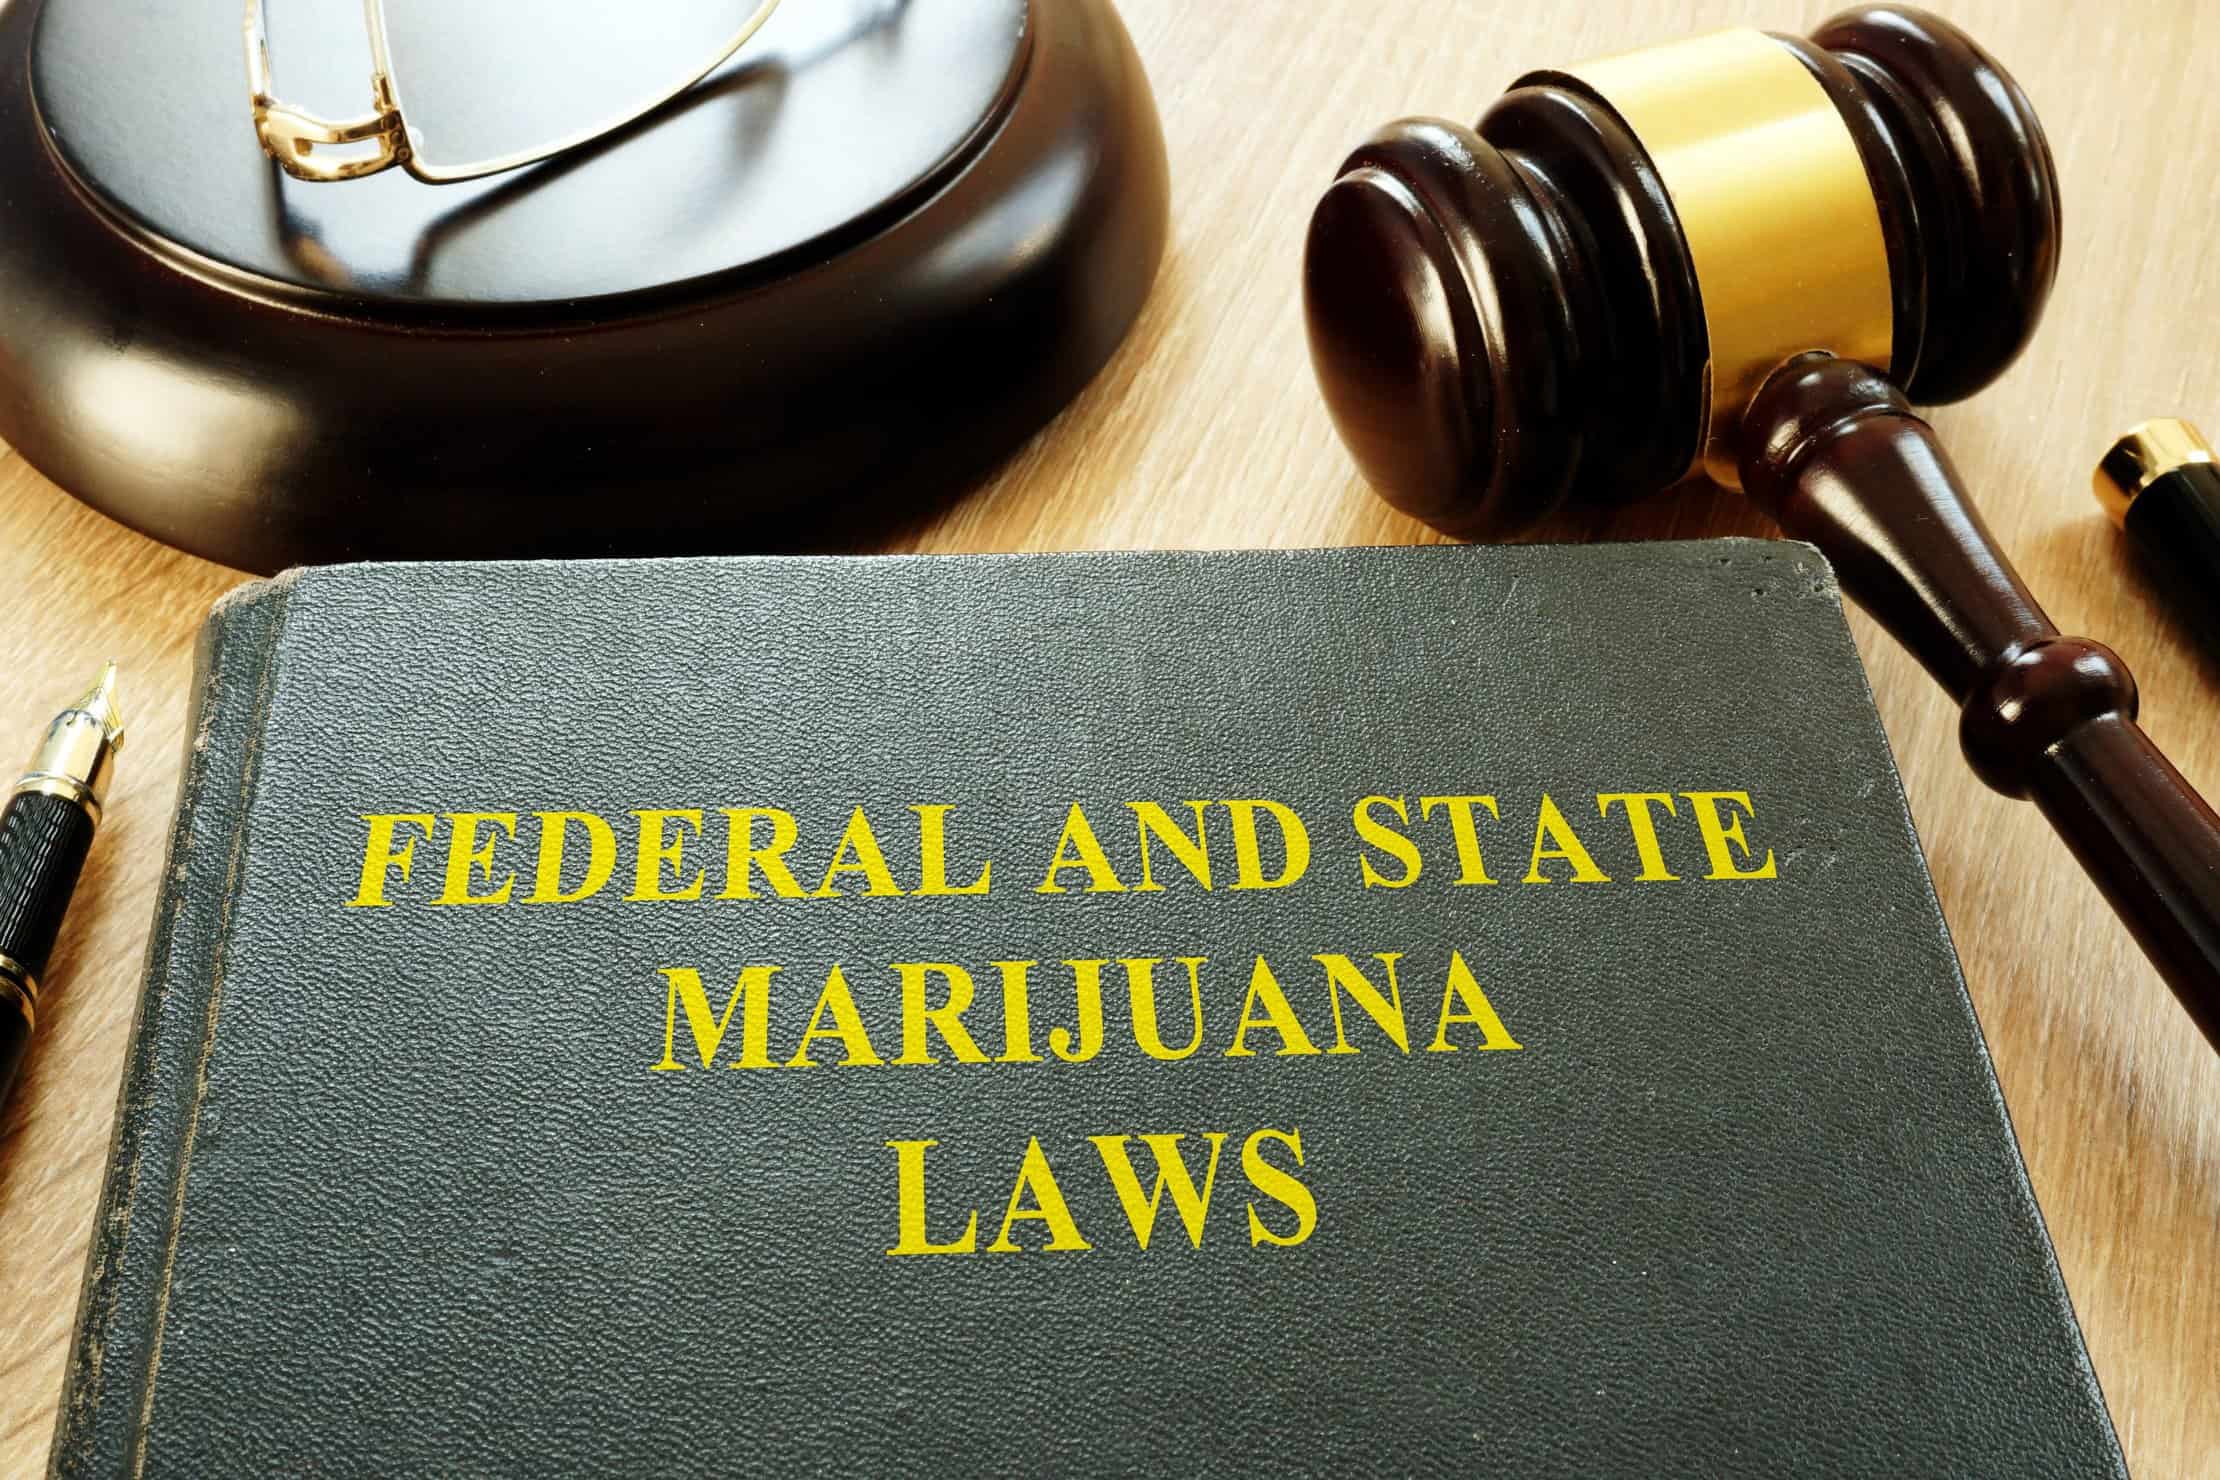 How To Become A Marijuana Industry Lawyer. Book titled Federal And State Marijuana Laws